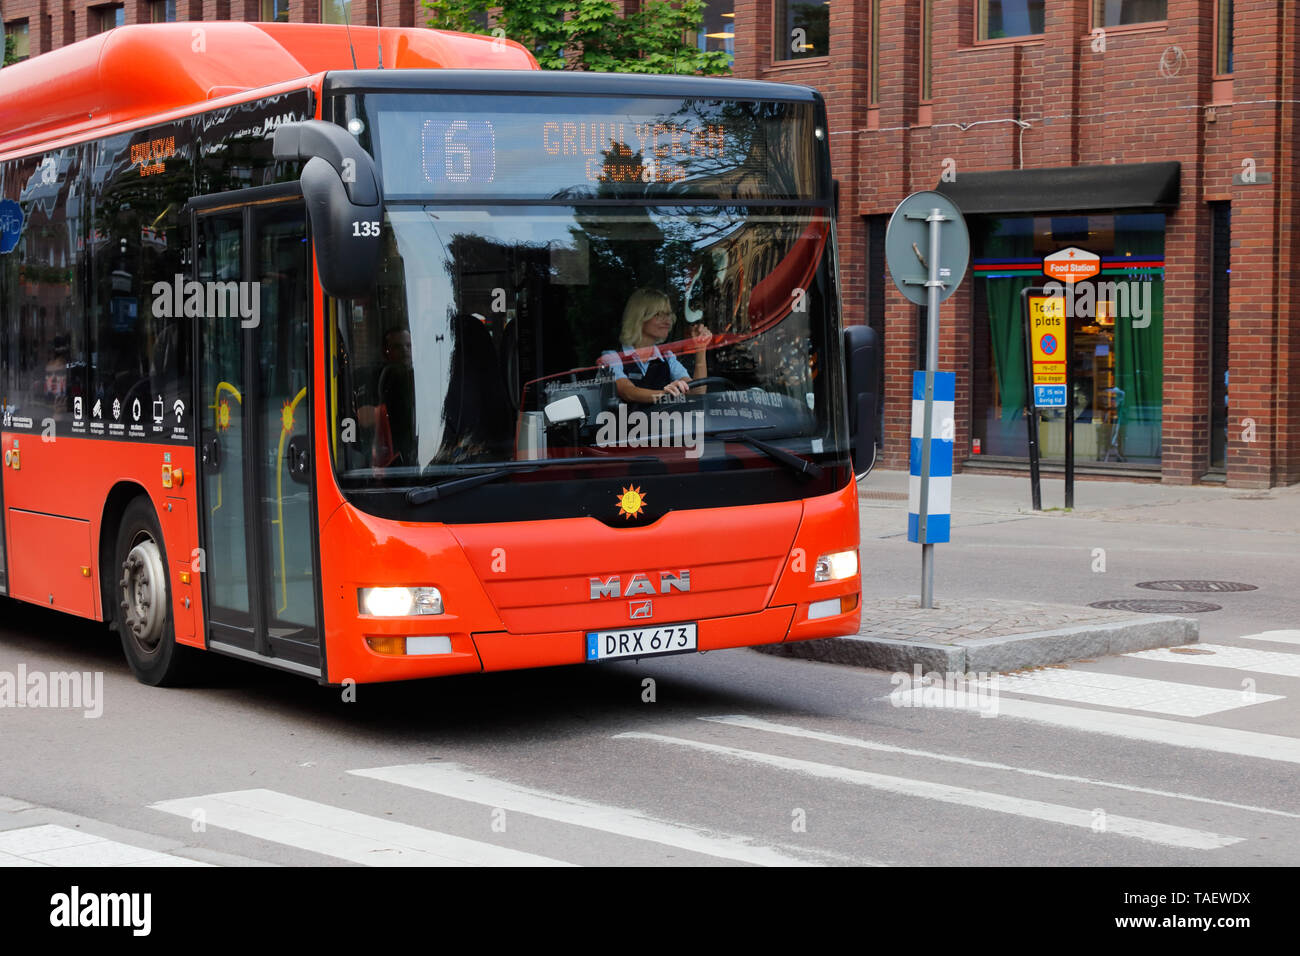 Karlstad, Sweden - May 21, 2019: Front view of an orange city bus in service on line 6 operated by the public transportation comnpany Karlstadsbuss. Stock Photo